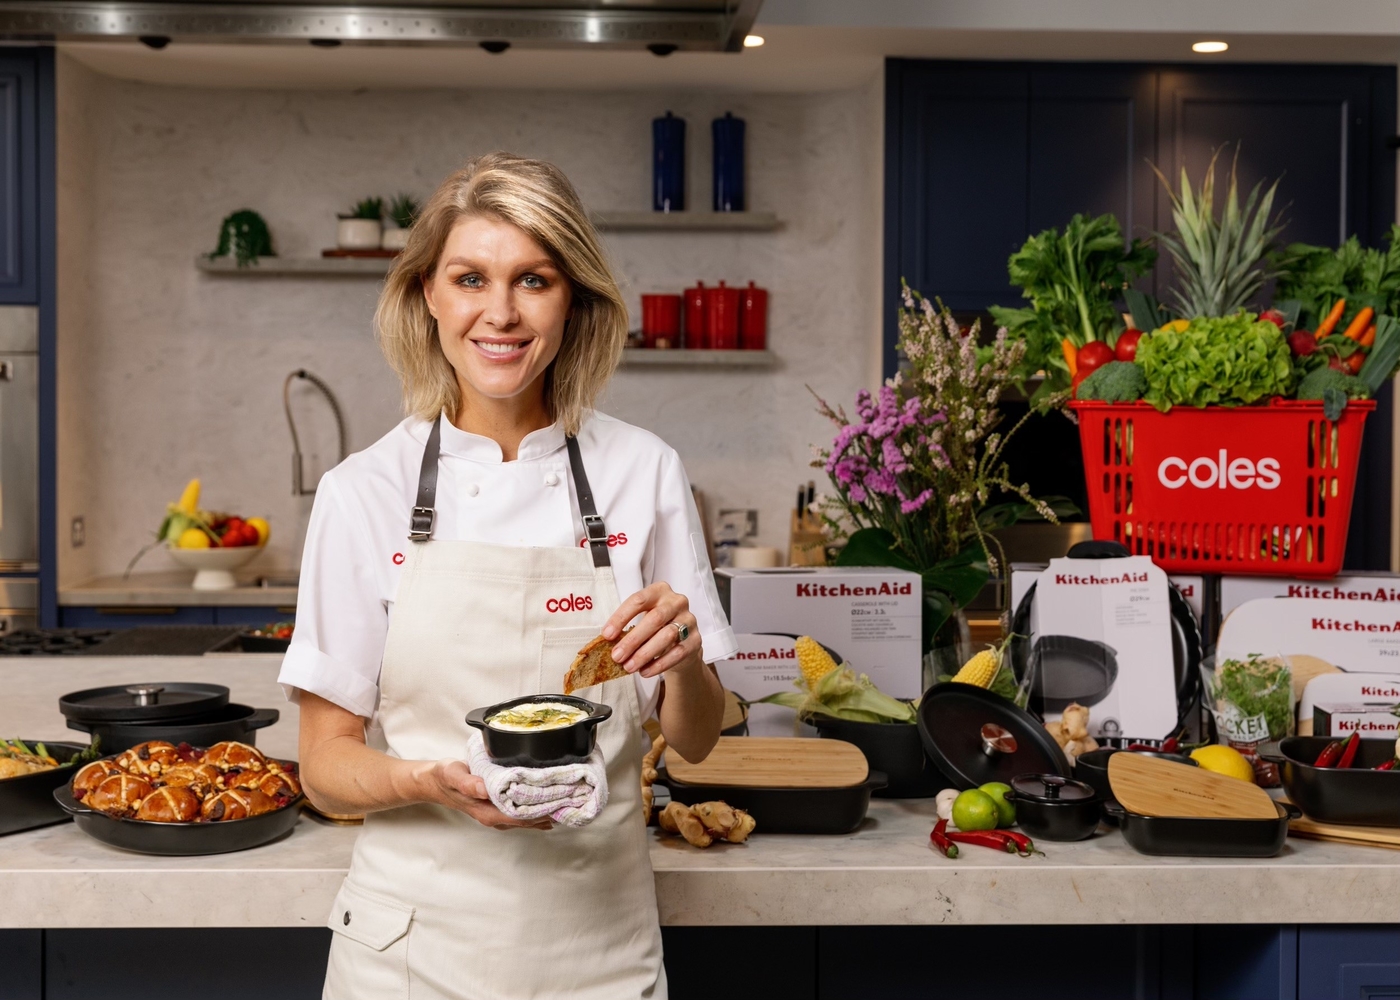 Coles Ambassador and chef Courtney Roulston with the new KitchenAid ovenware